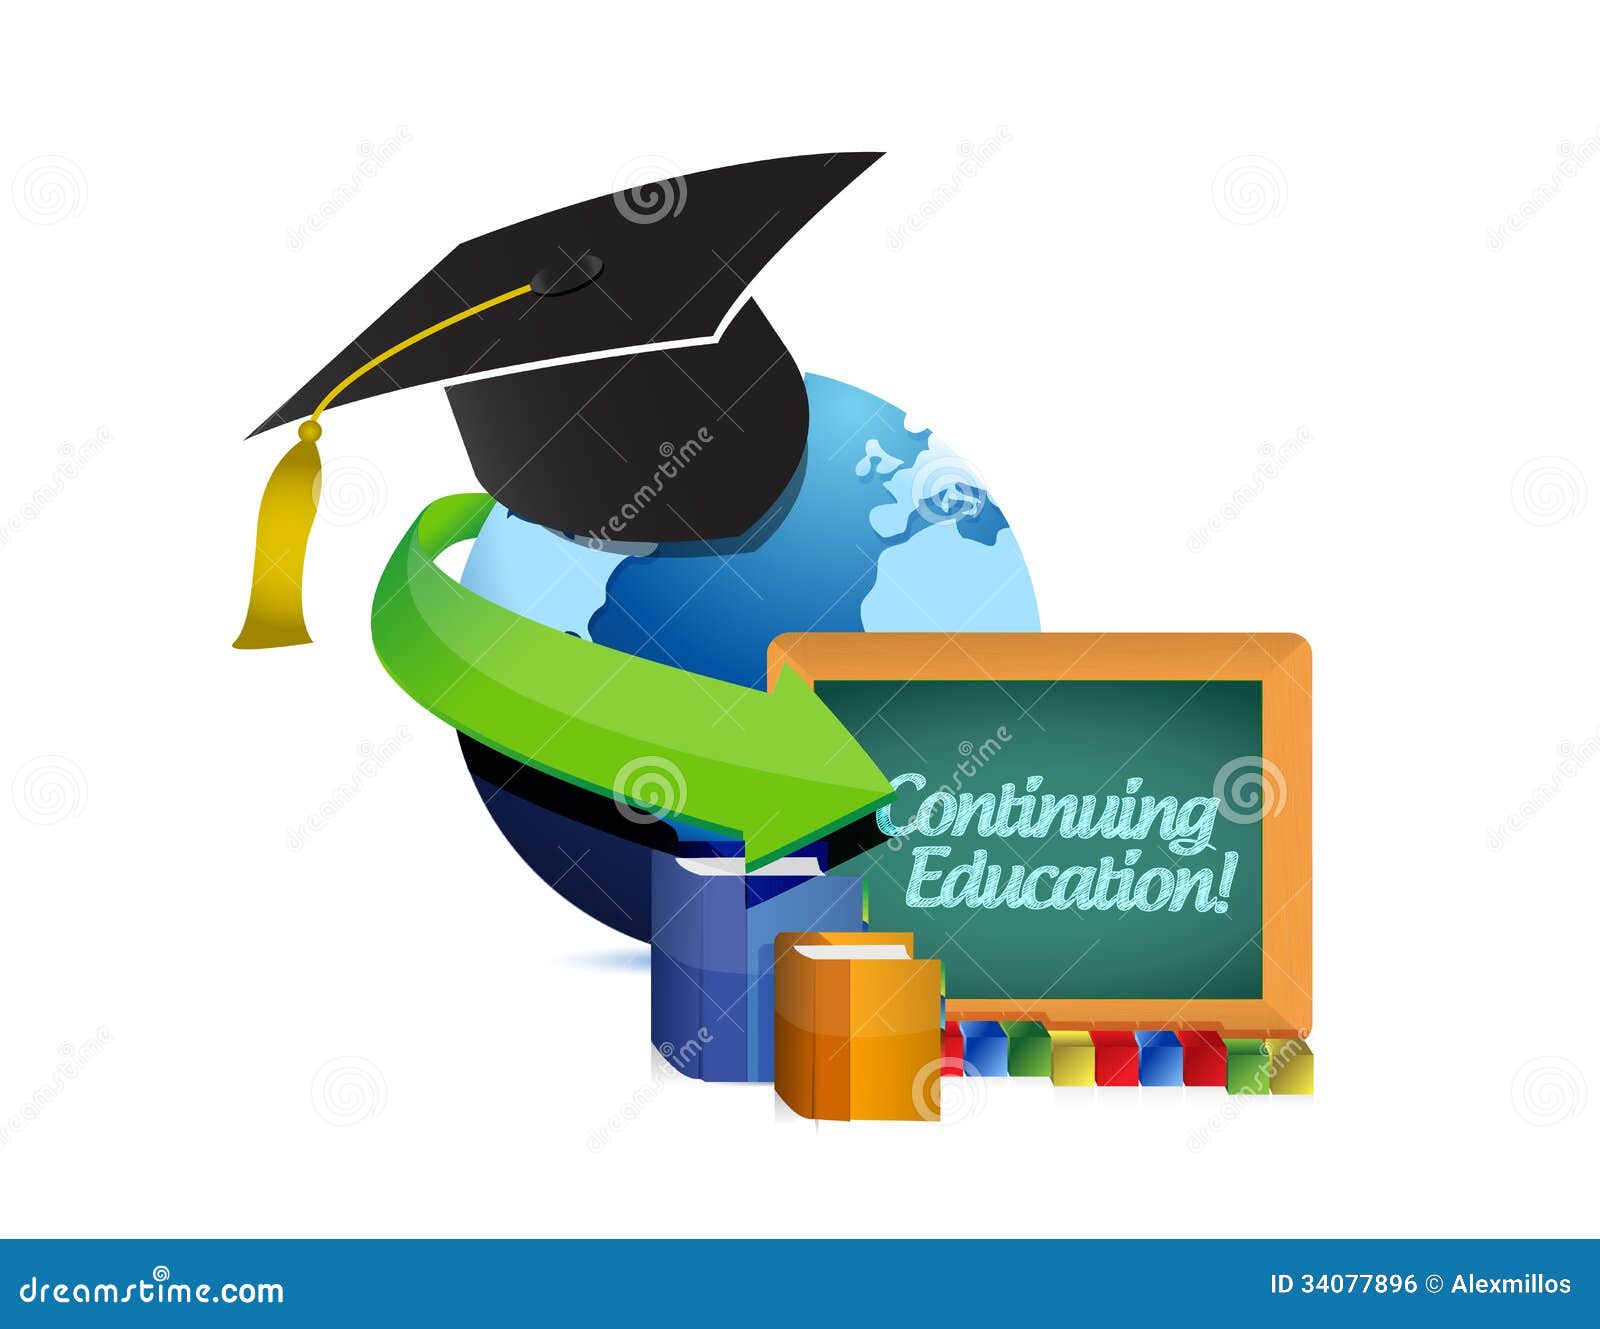 education clipart download - photo #36